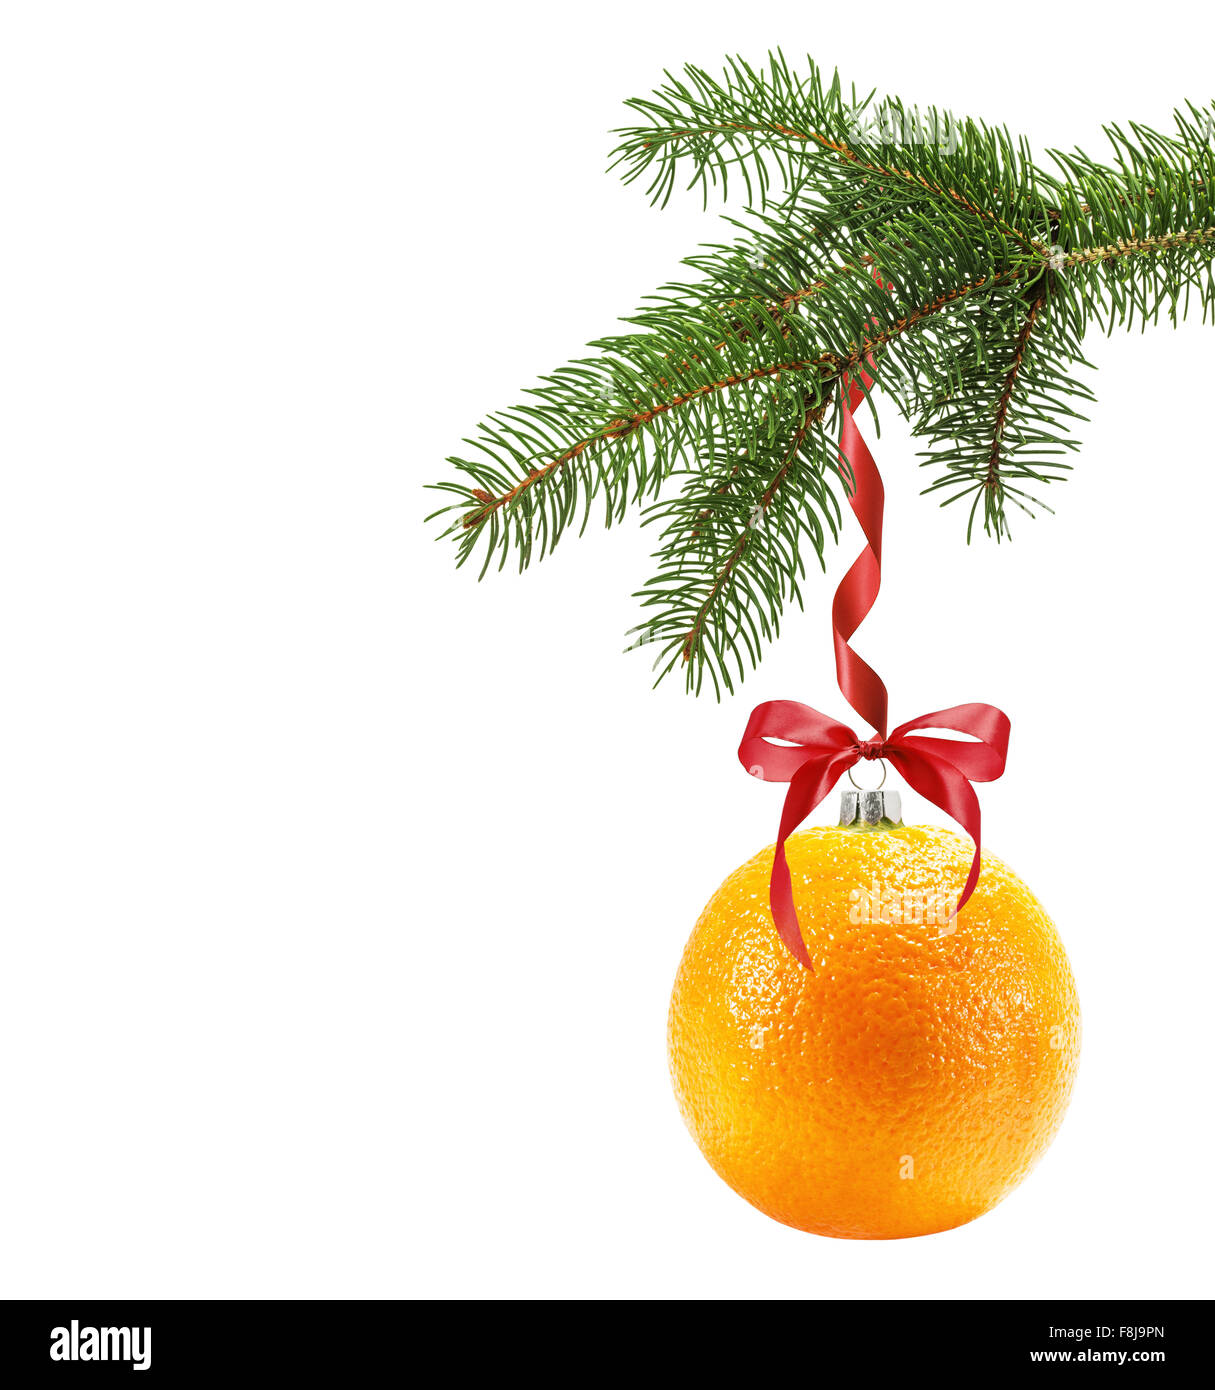 Christmas tree branch with Christmas ball in shape of orange isolated on the white background. Stock Photo